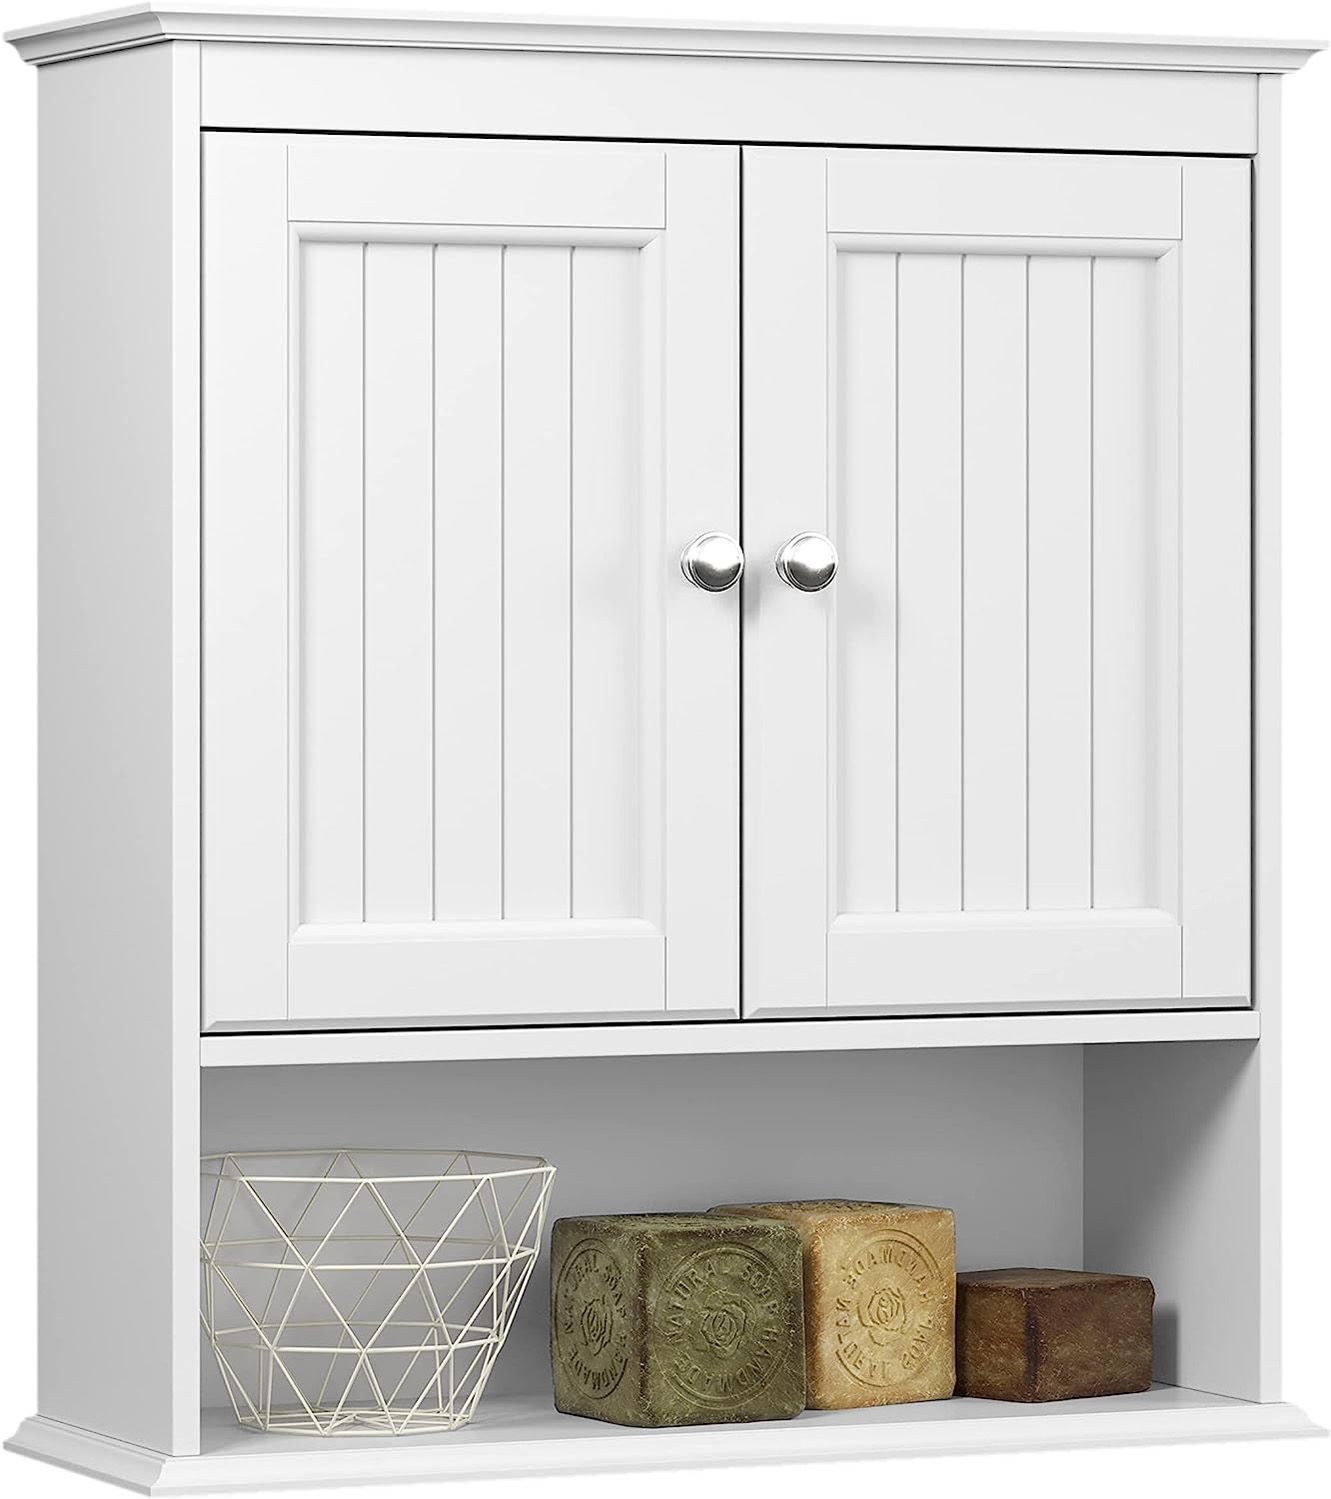 Spirich Home Bathroom Cabinet Wall Mounted with Doors